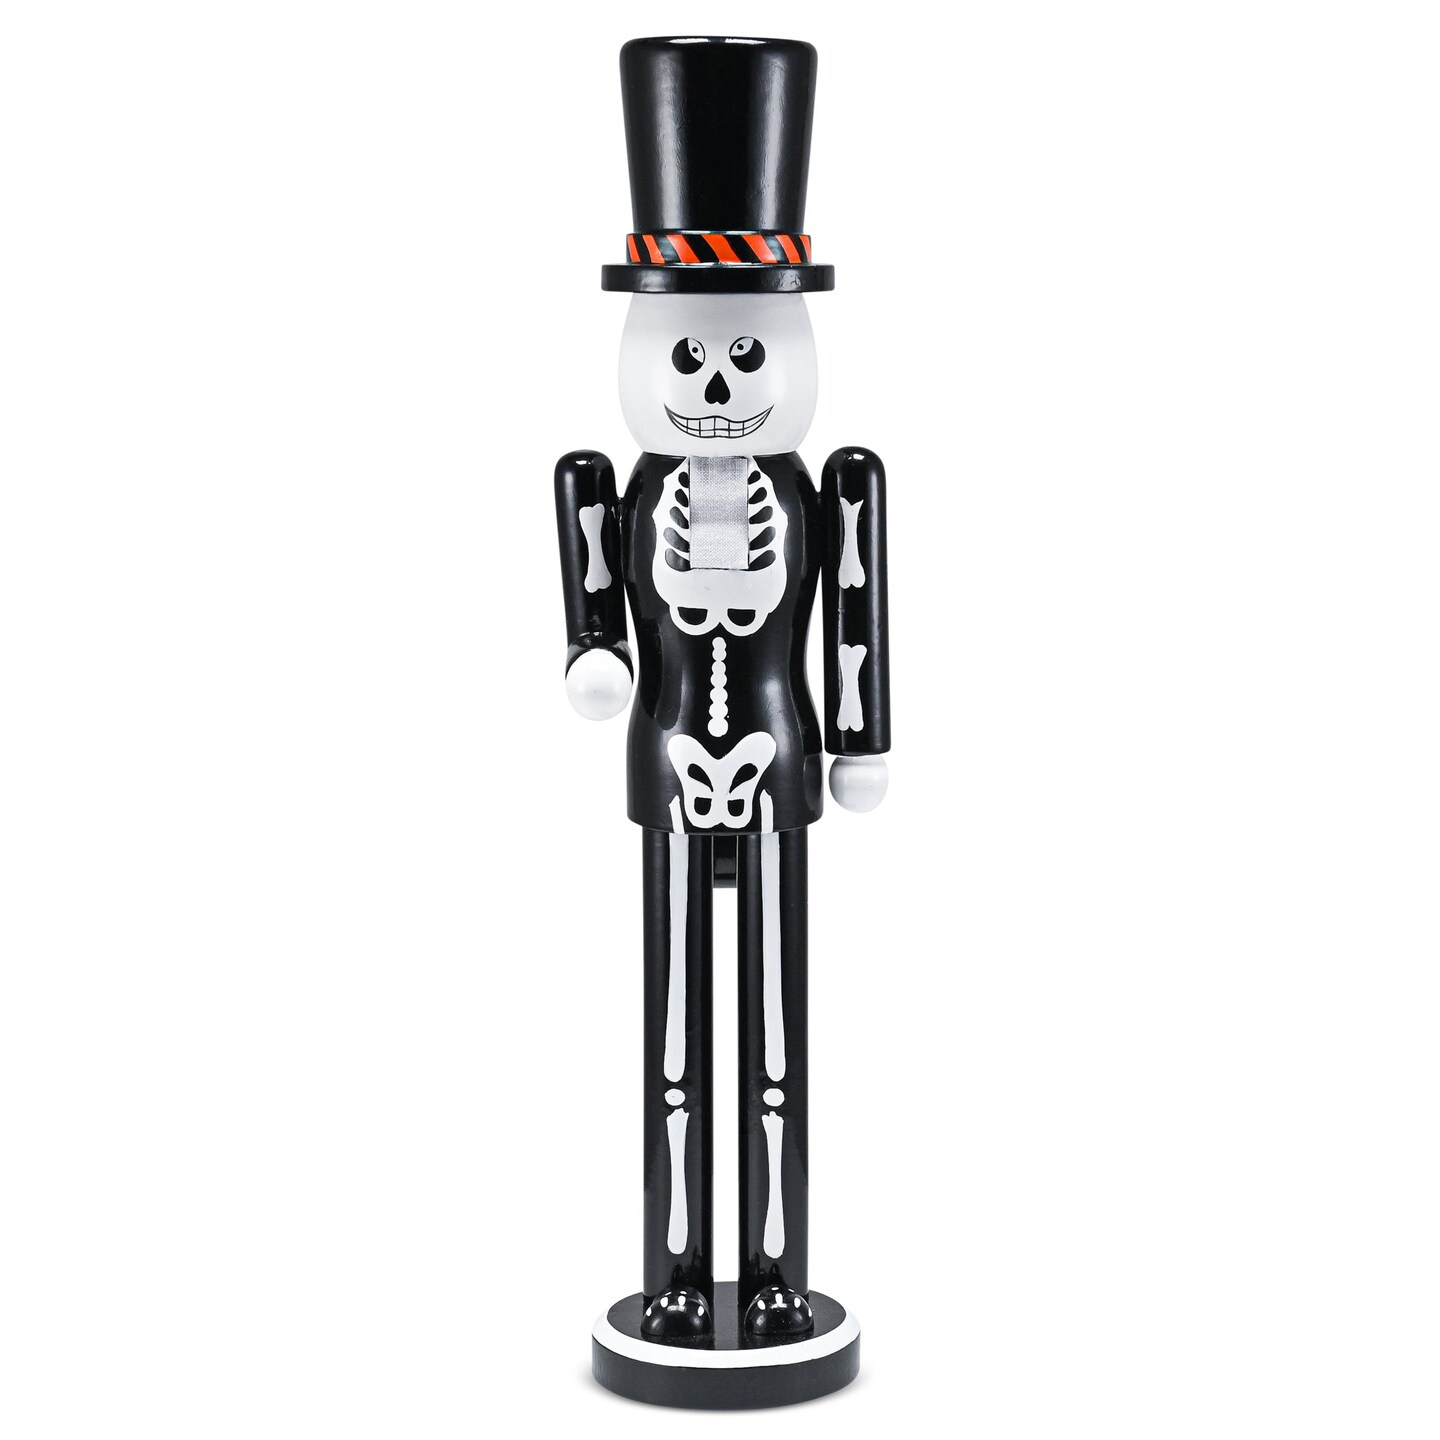 Ornativity Christmas Scary Skeleton Nutcracker &#x2013; Black and White Wooden Day of The Dead Skeletal Nutcracker Man with Top Hat Xmas and Halloween Themed Holiday Nut Cracker Doll Figure Decorations